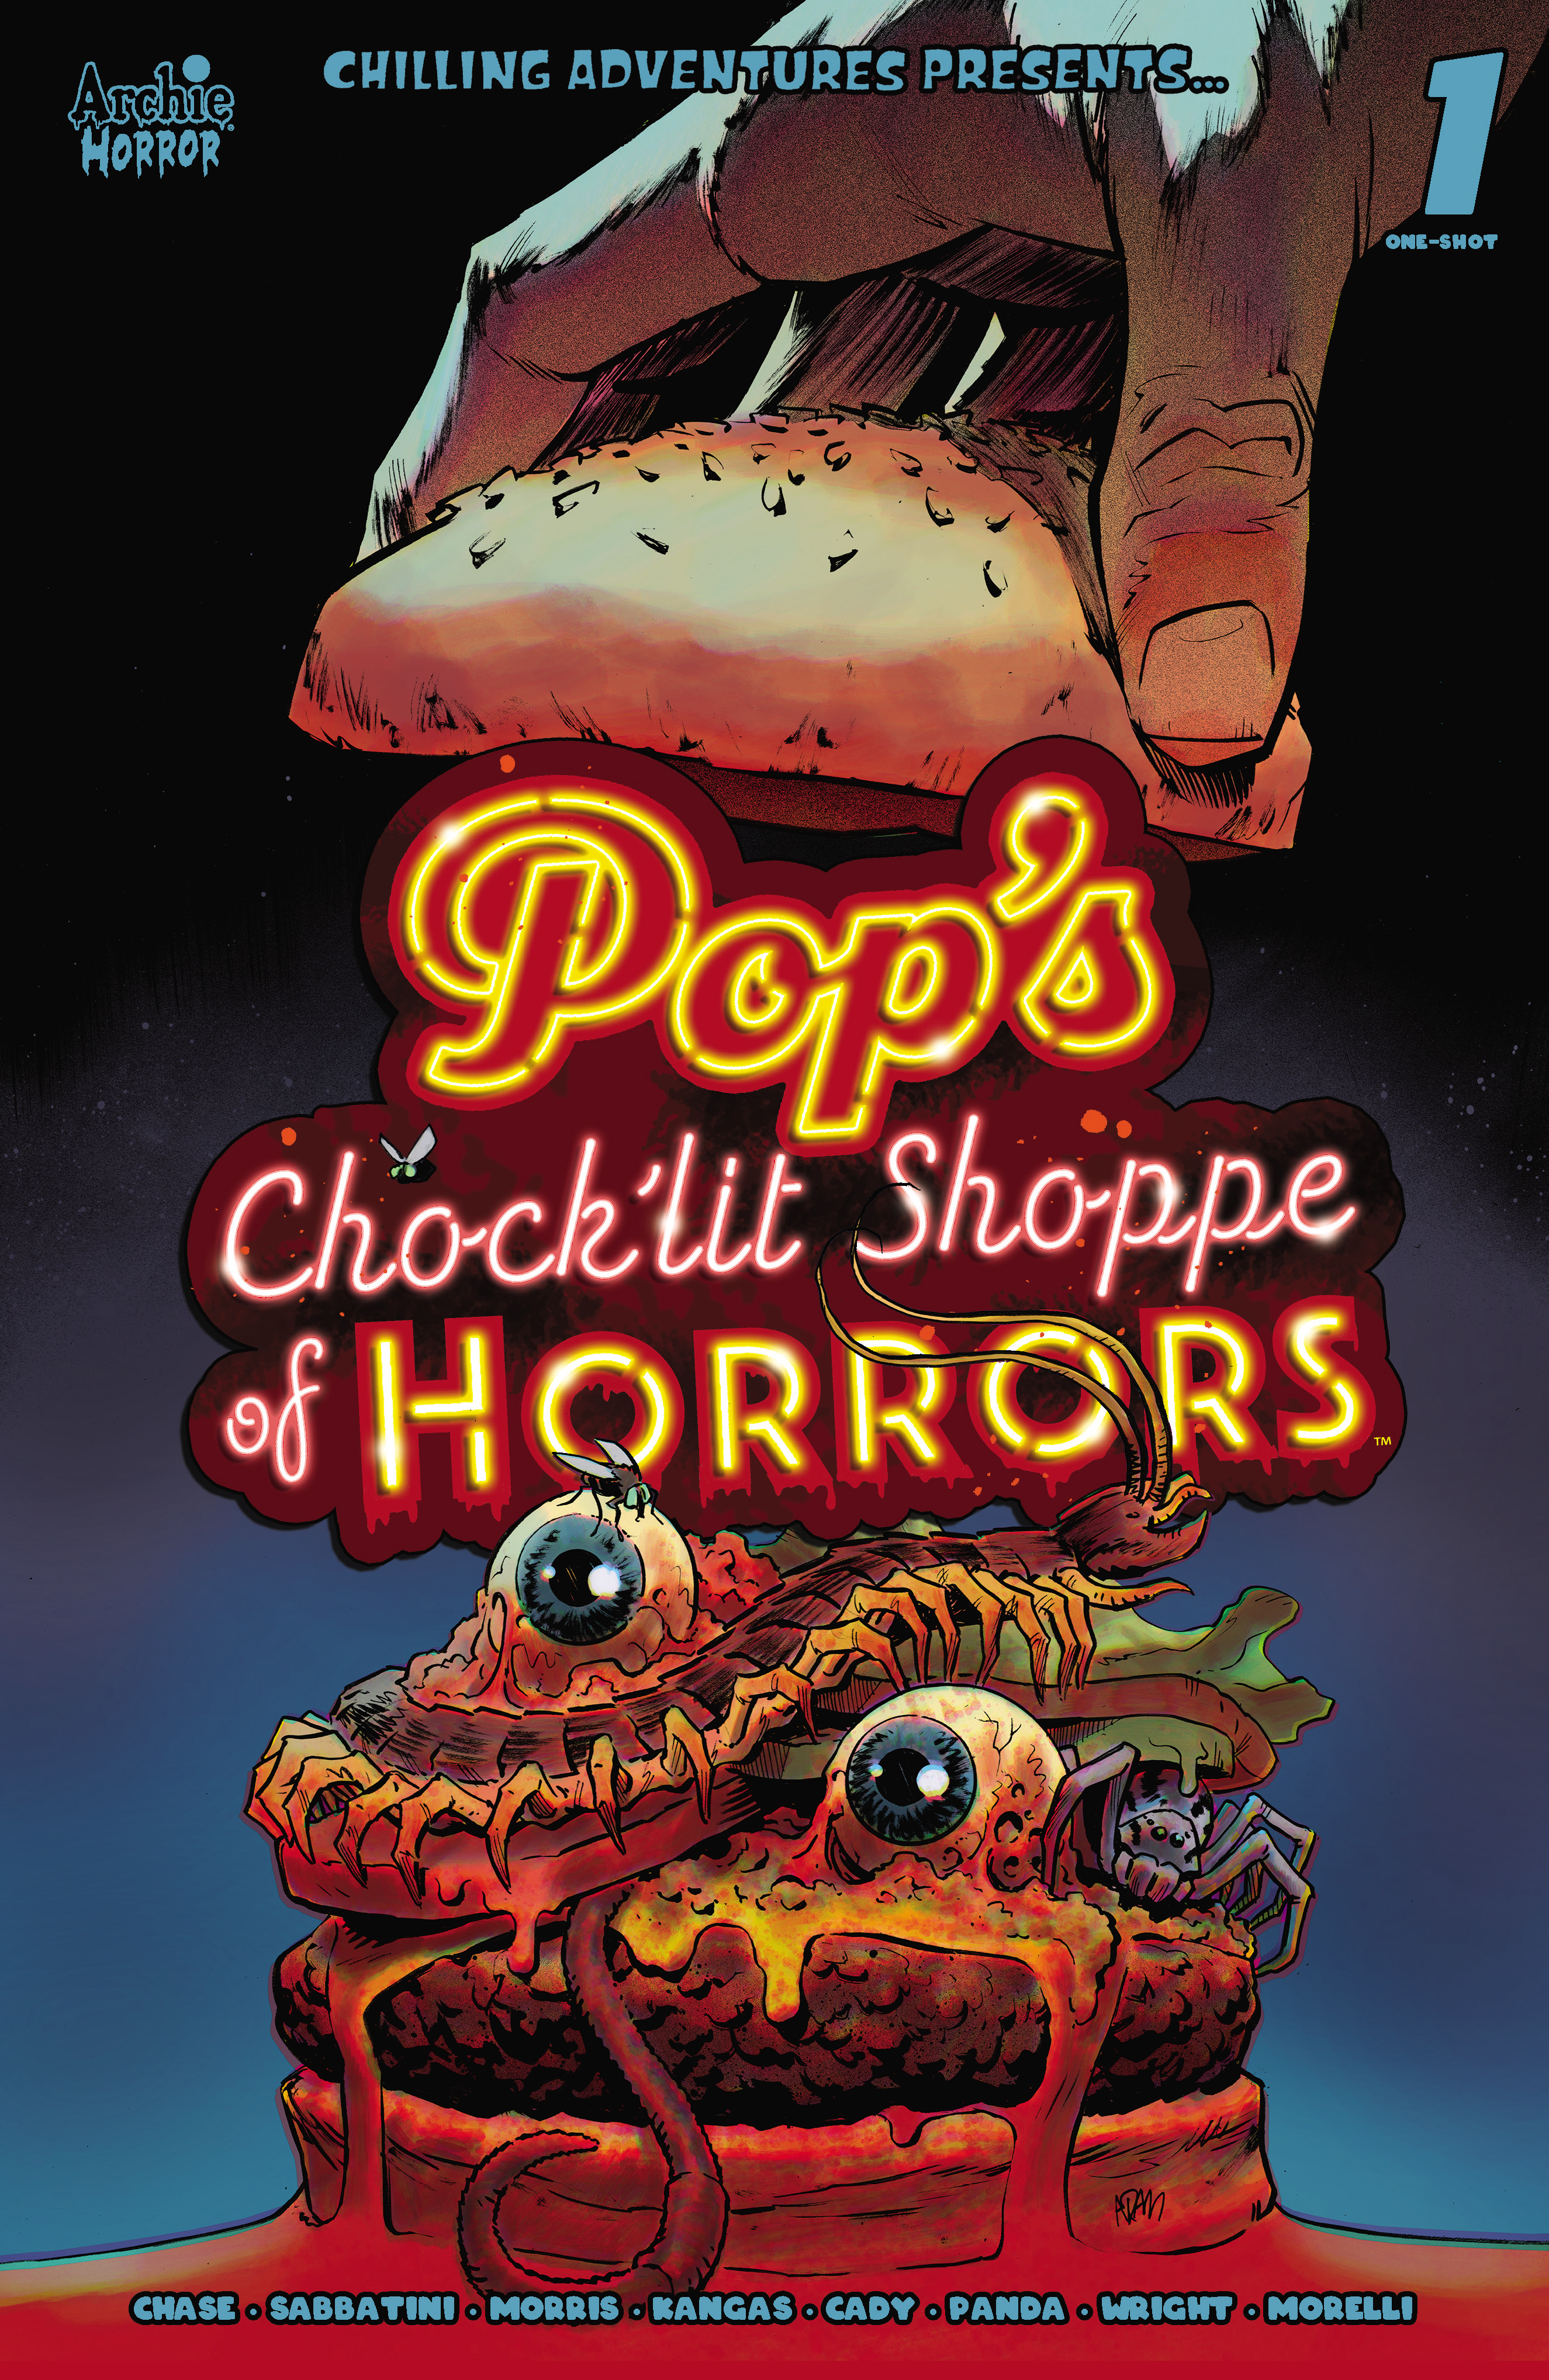 Chilling Adventures Presents ... Pop's Chock'lit Shoppe of Horrors (2023): Chapter 1 - Page 1